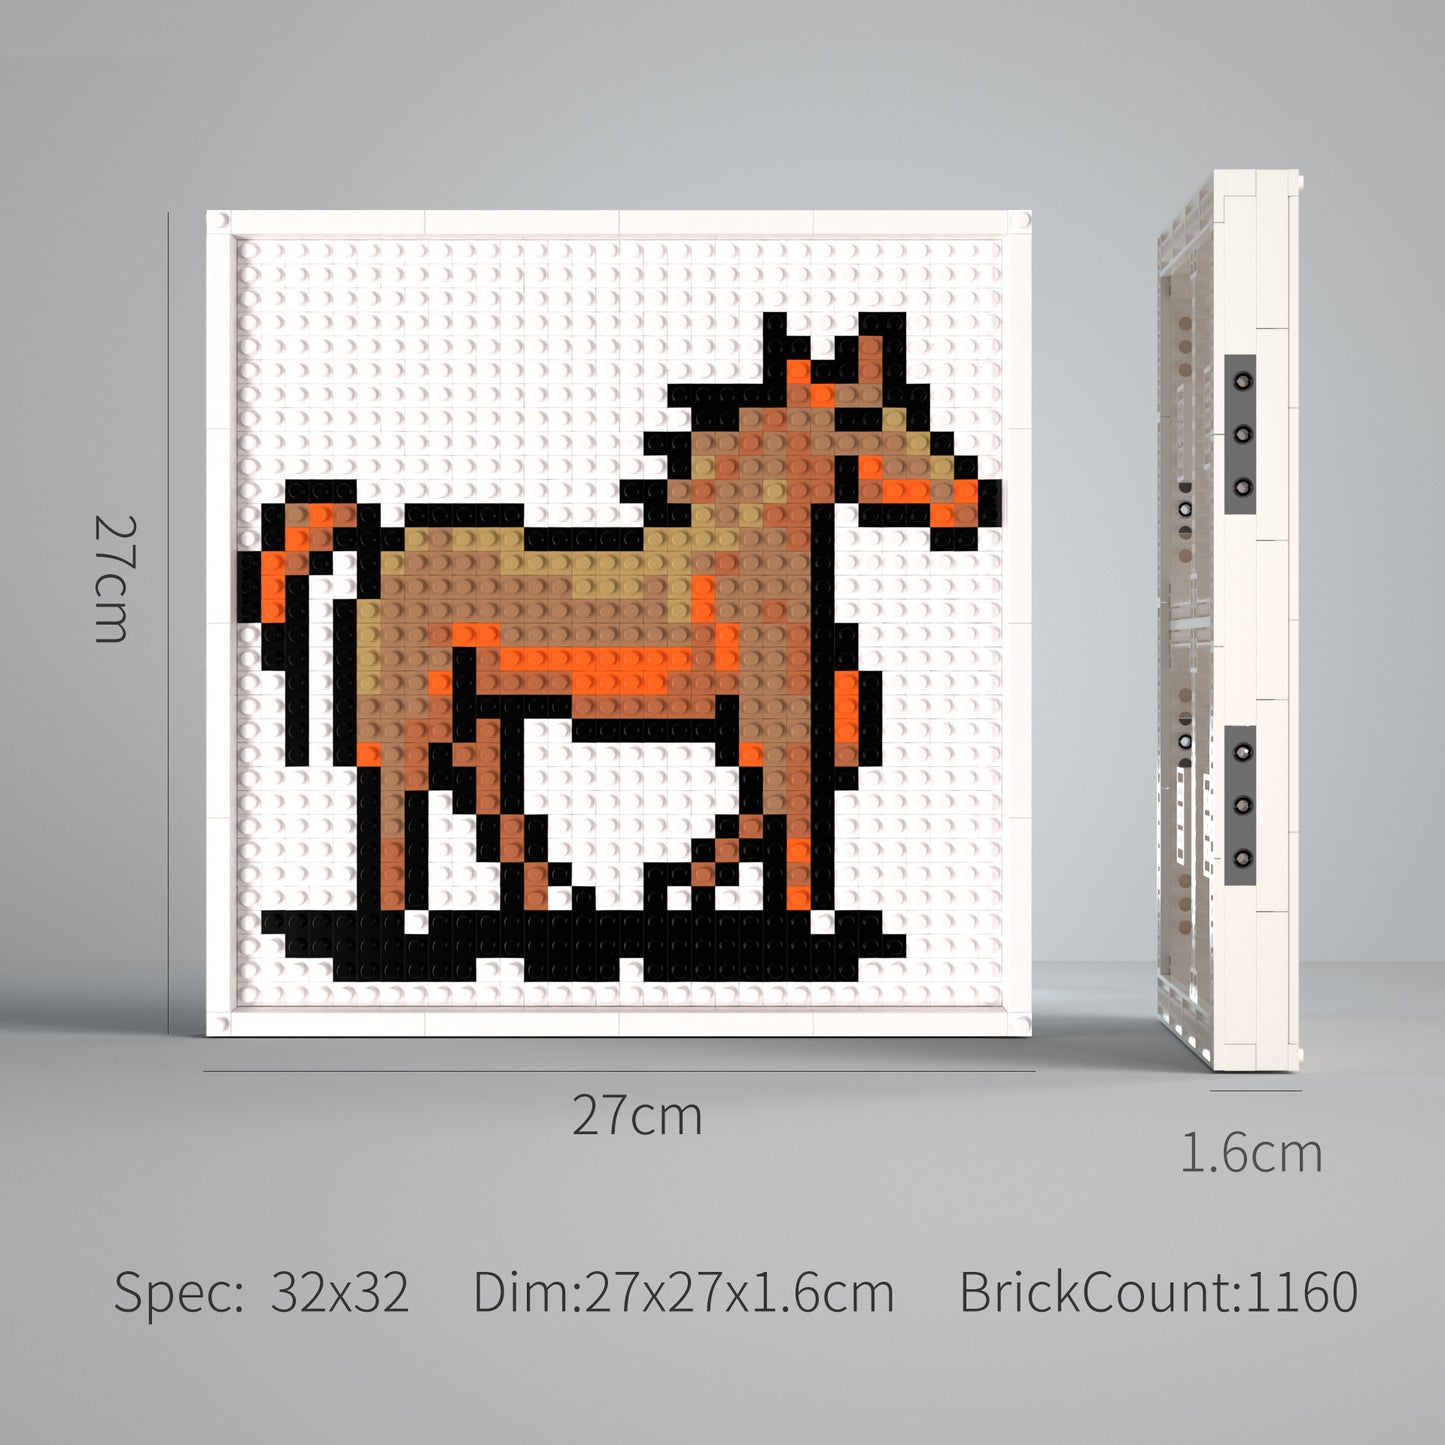 Majestic Horse Building Brick Pixel Art - 32*32 Modular Compatible with Lego